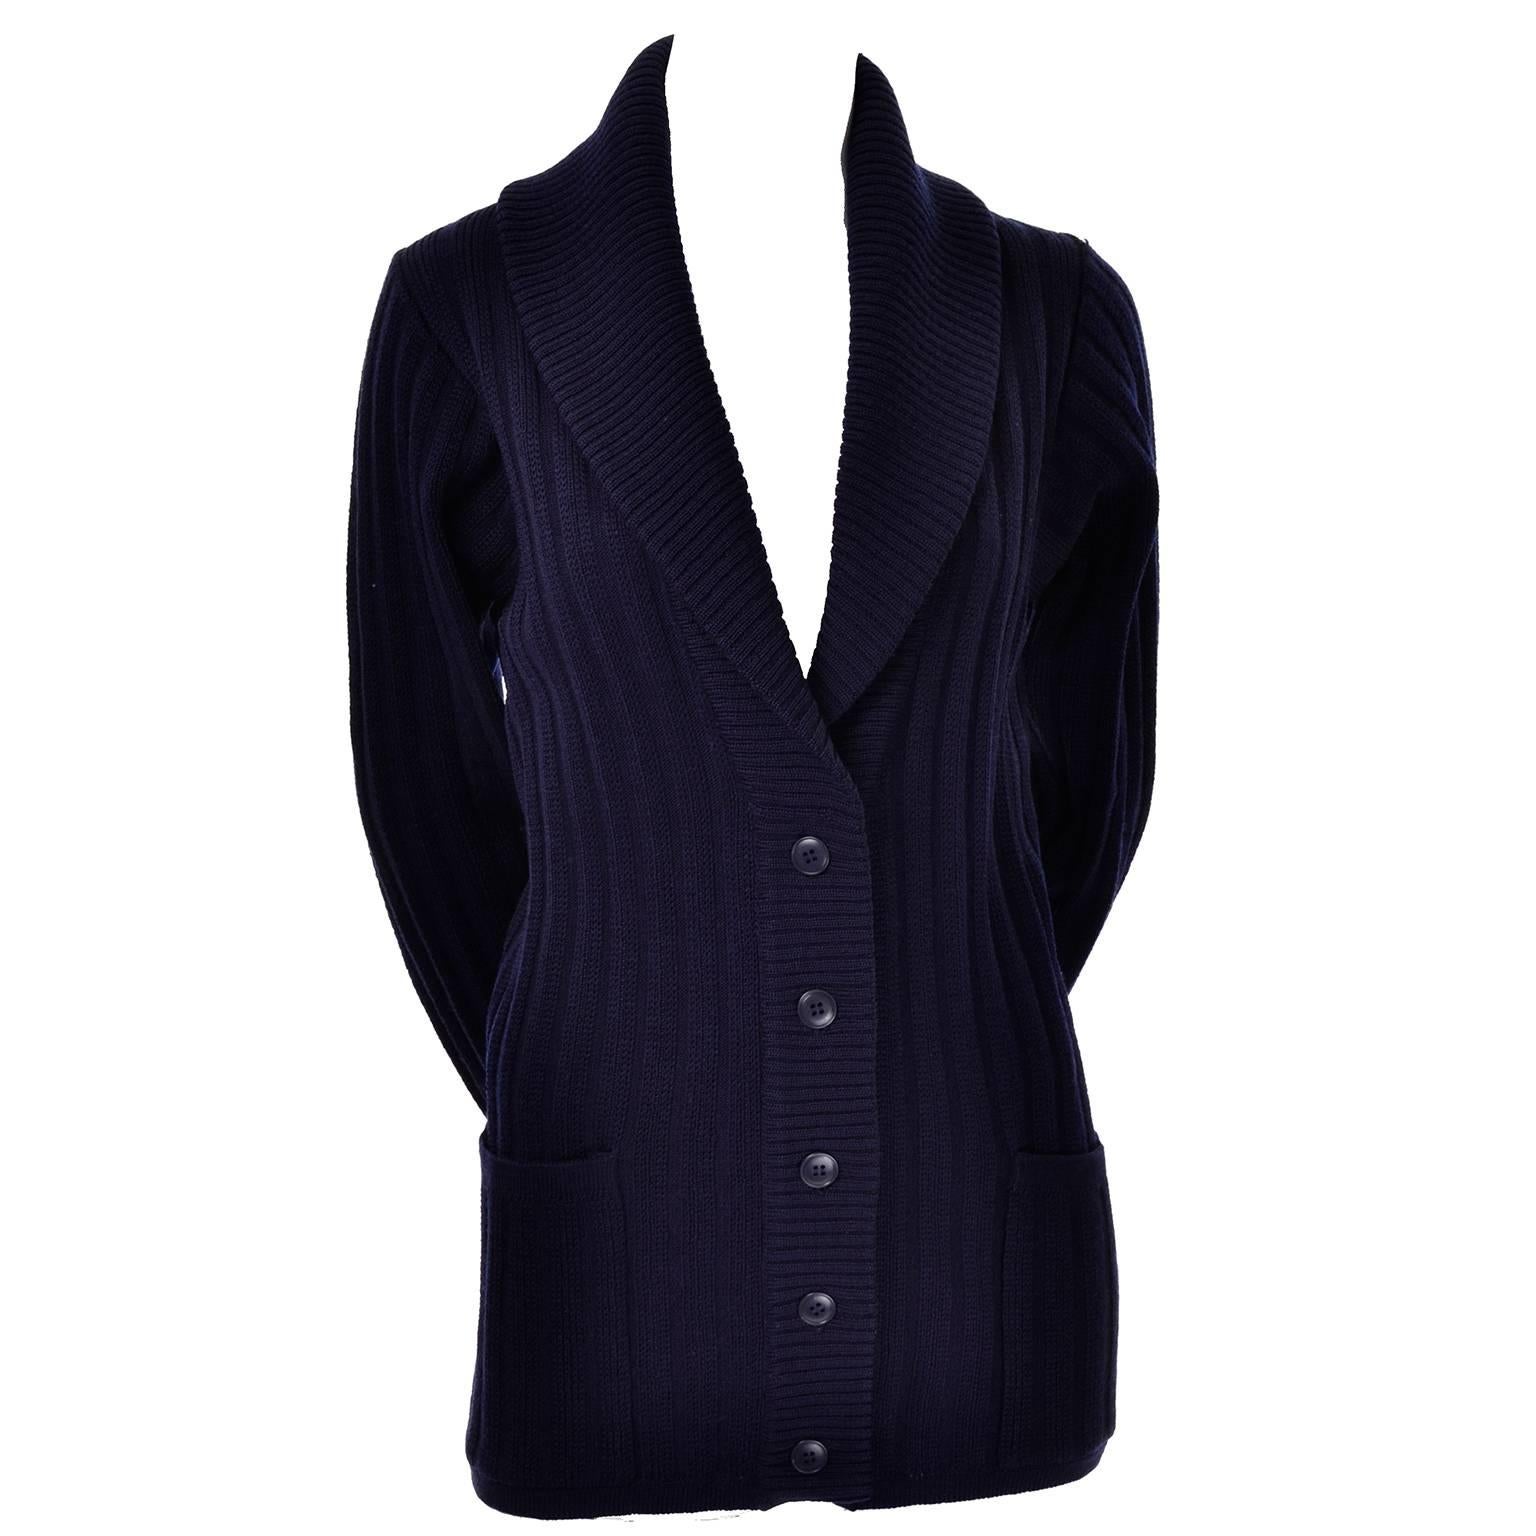 This navy blue wool ribbed knit vintage cardigan was designed by Yves Saint Laurent in the late 1970's.  This is a beautiful cardigan with a large shawl collar and rolled cuff sleeves. This sweater buttons up the front, and has two front pockets.